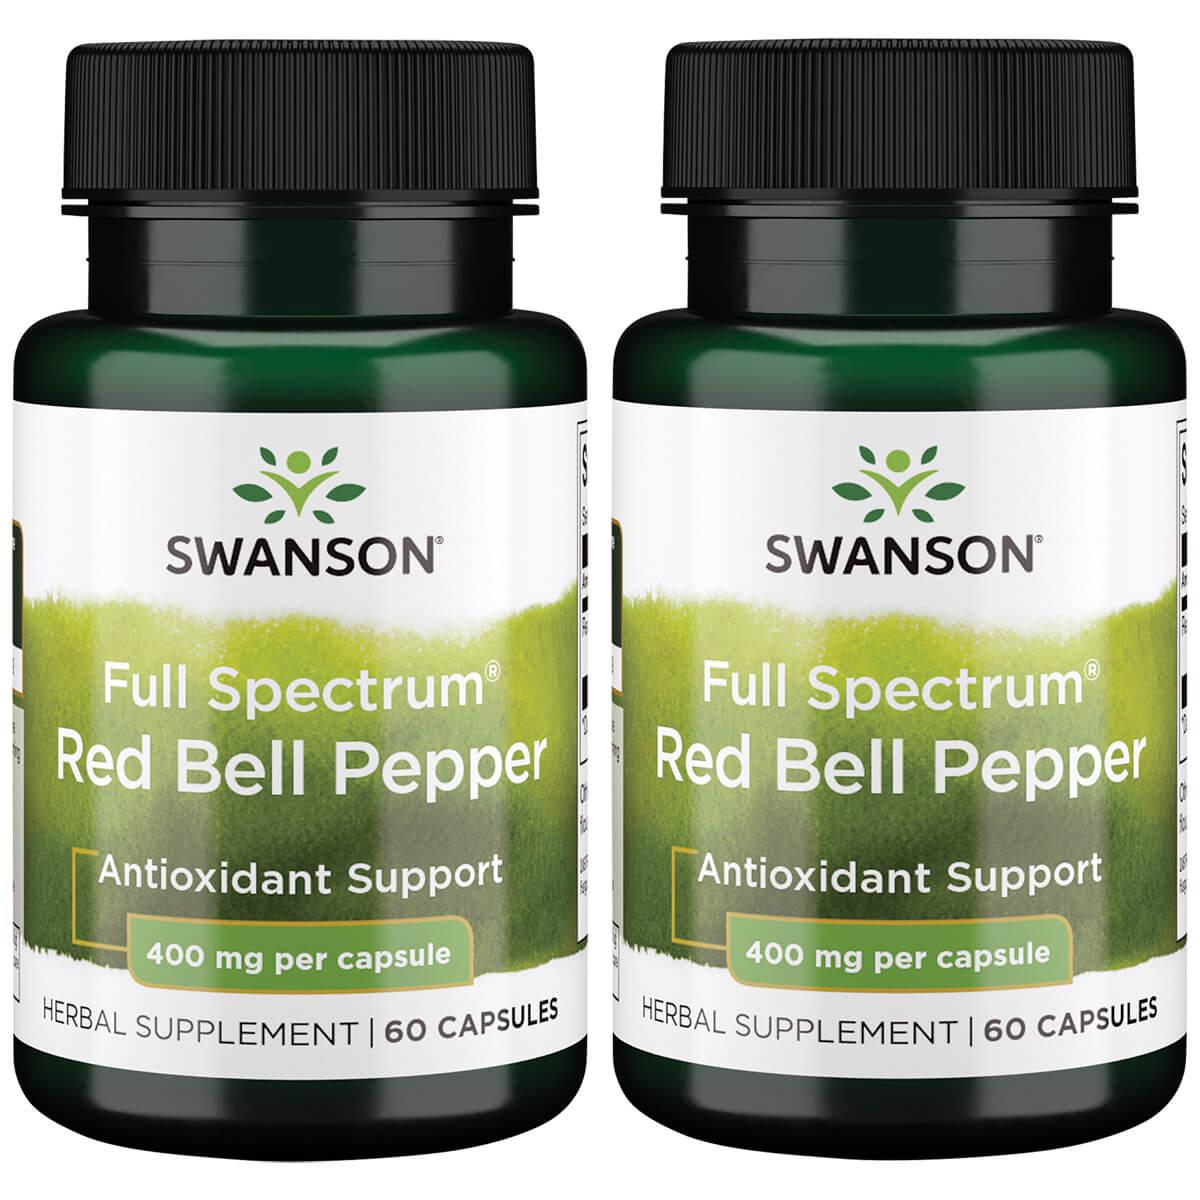 Swanson Premium Full Spectrum Red Bell Pepper 2 Pack Supplement Vitamin 400 mg 60 Caps Herbs and Supplements